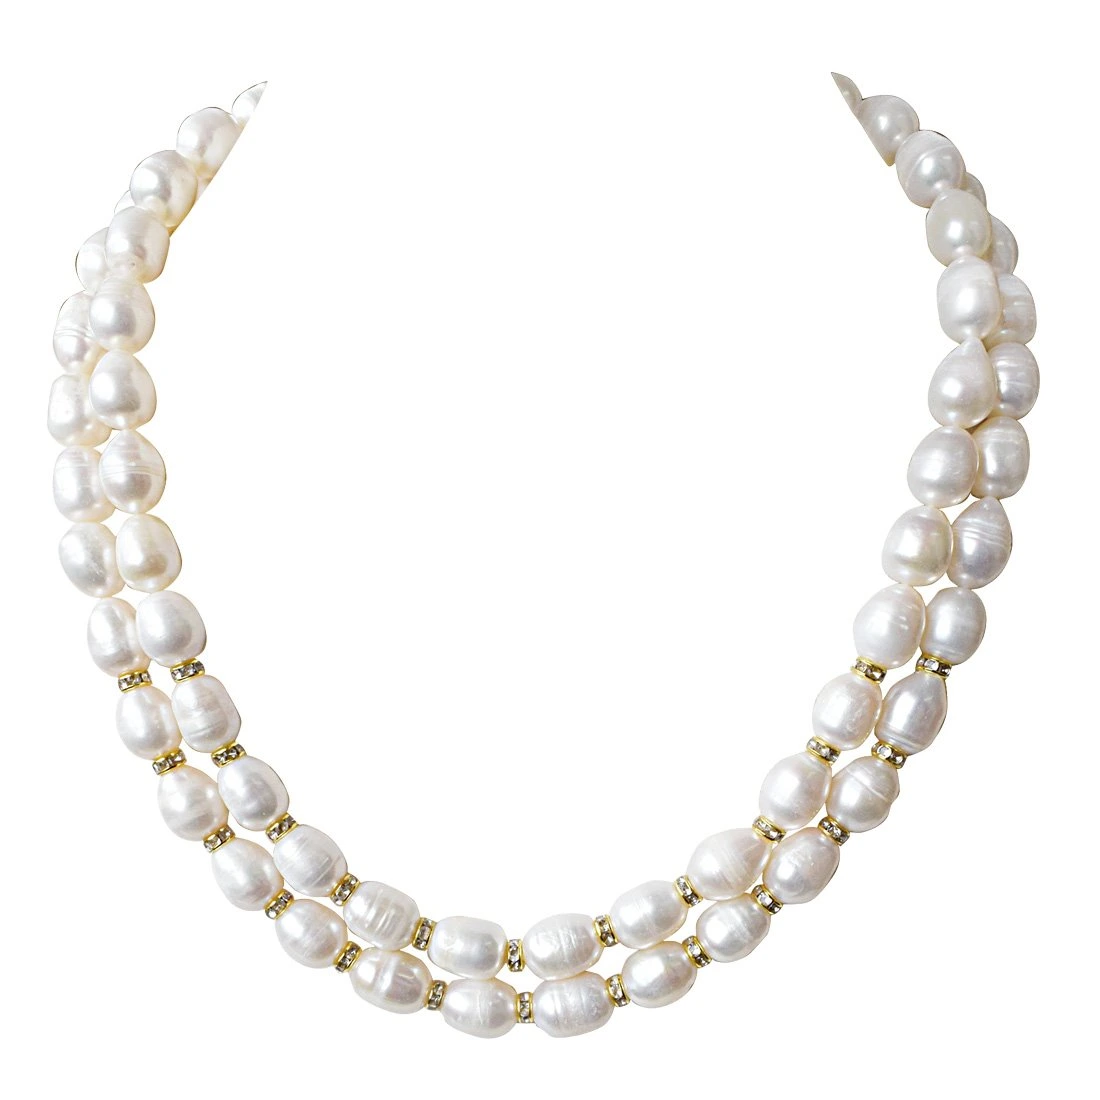 2 Line Heavy Looking Real Big Elongated Pearl and Stone Ring Necklace for Women (SN919)